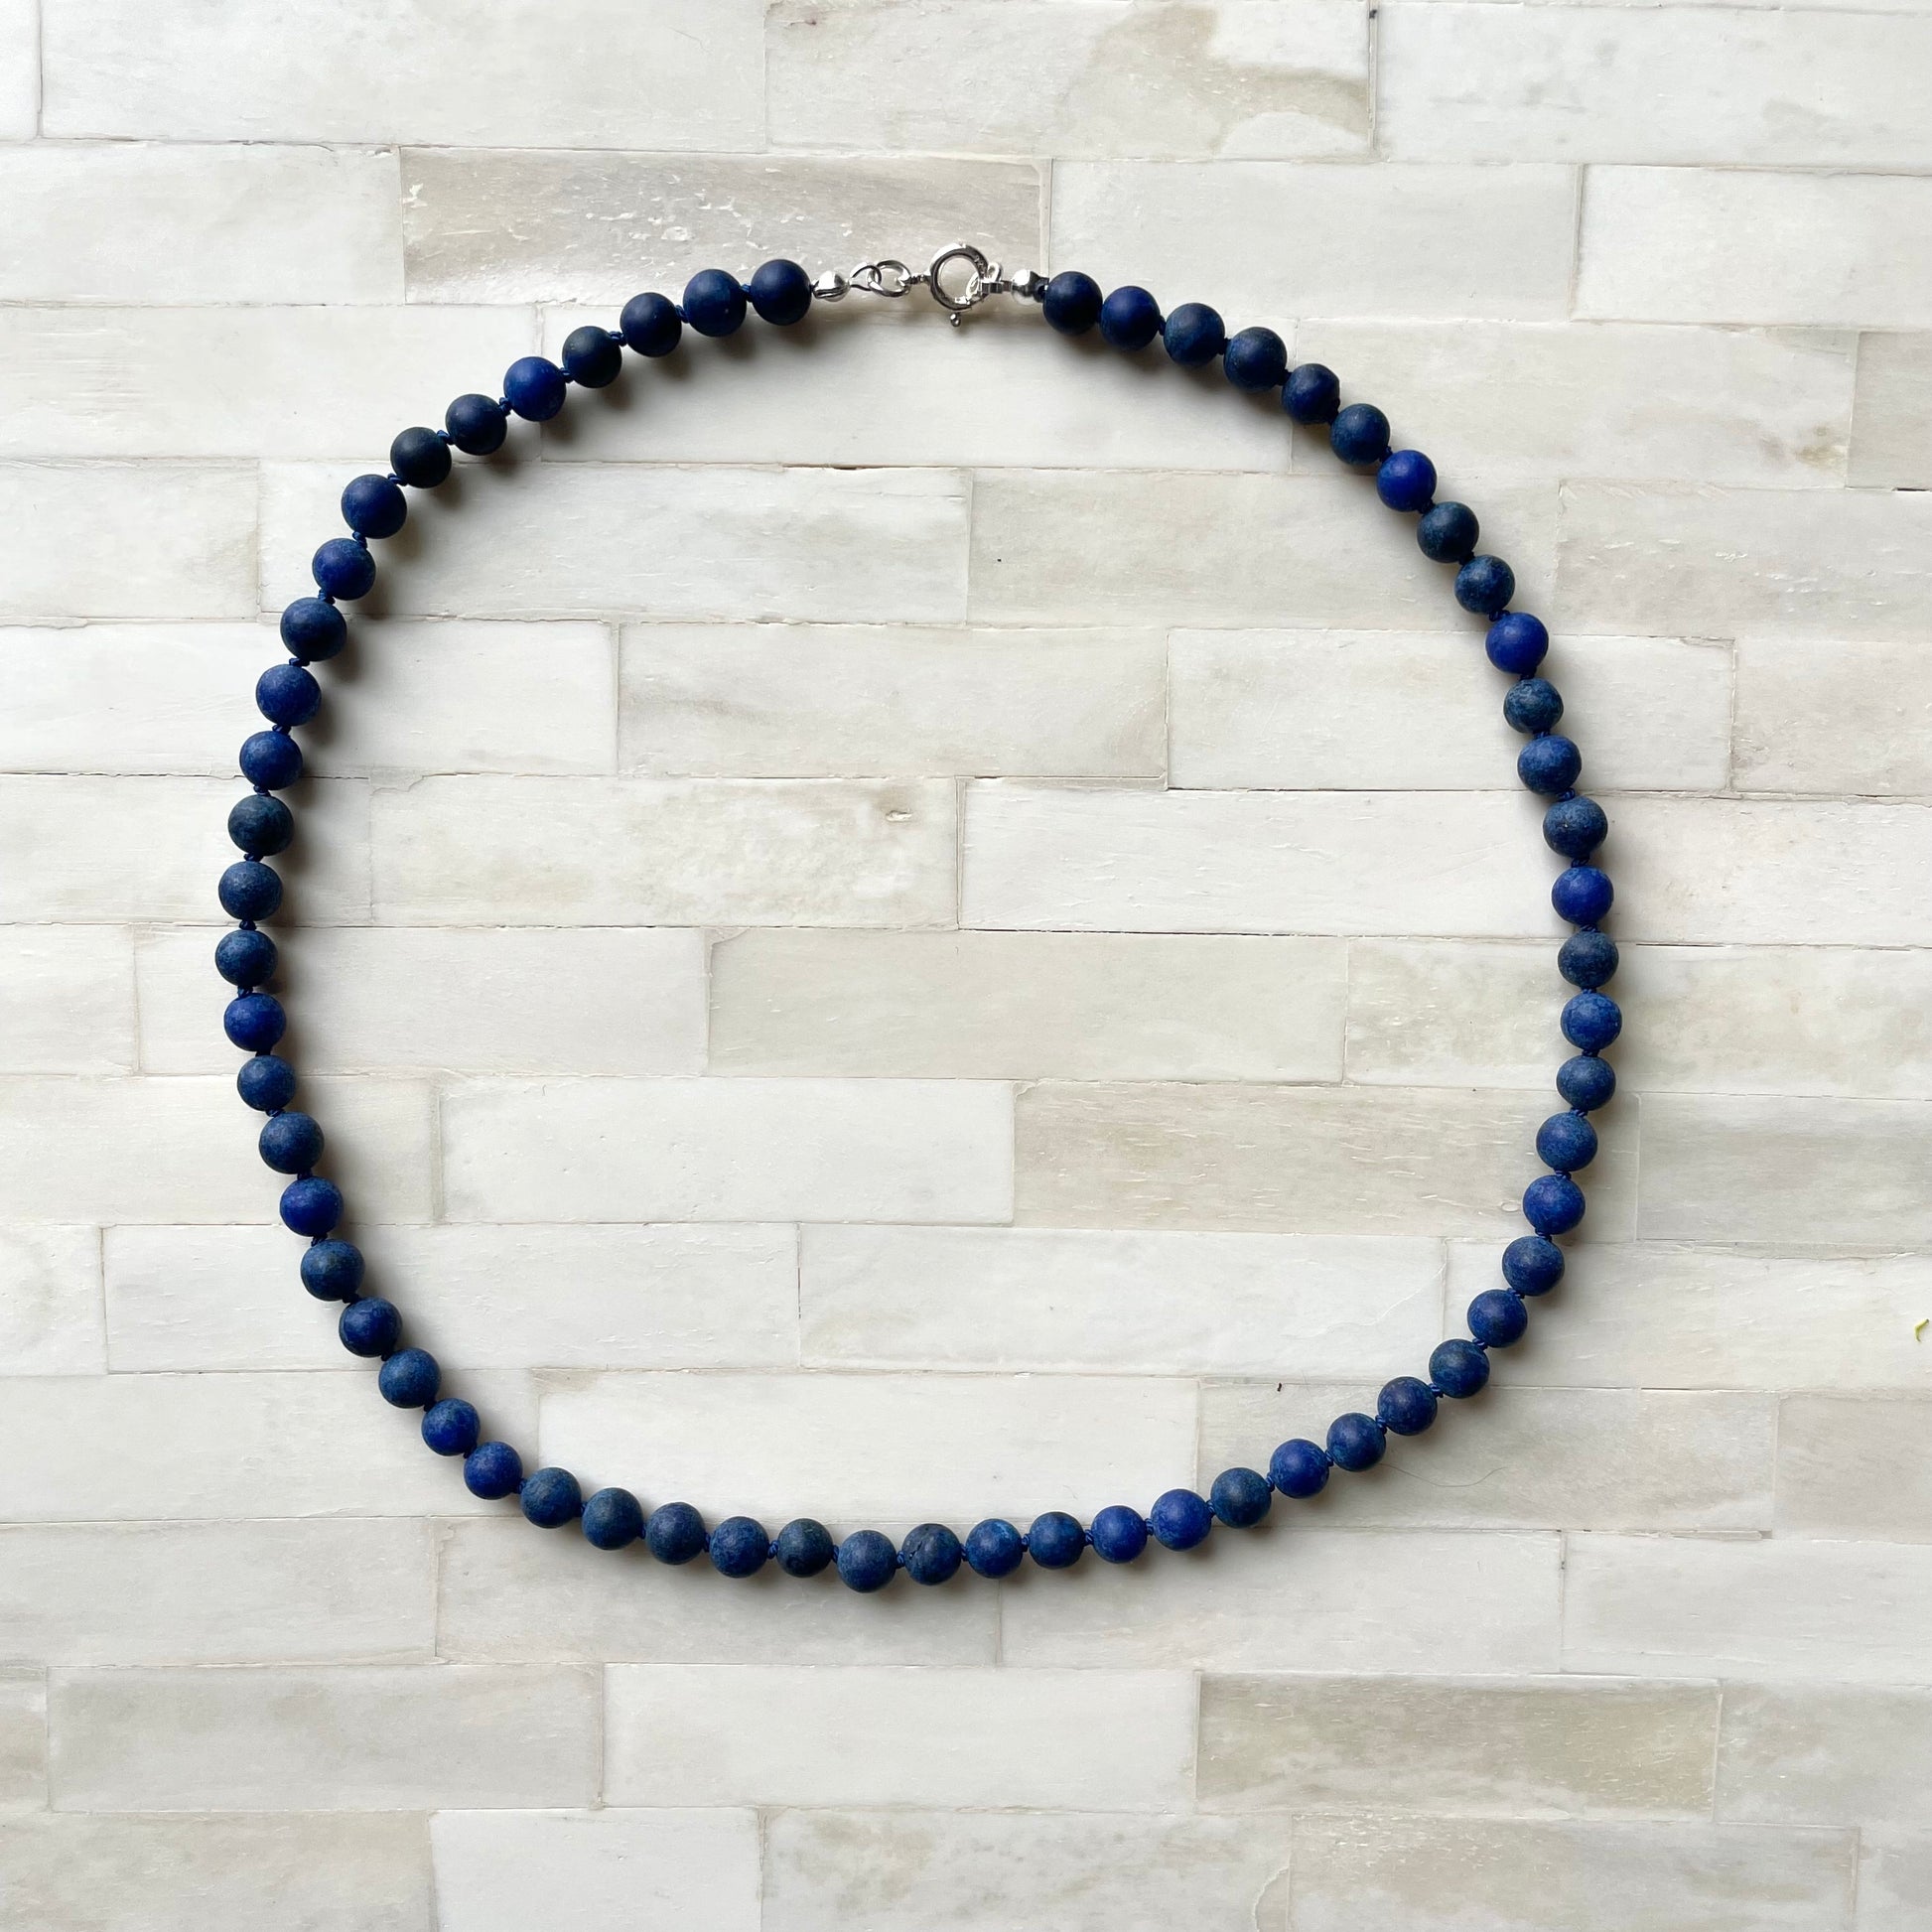 Hank knotted beaded necklace. Semi precious lapis lazuli necklace.